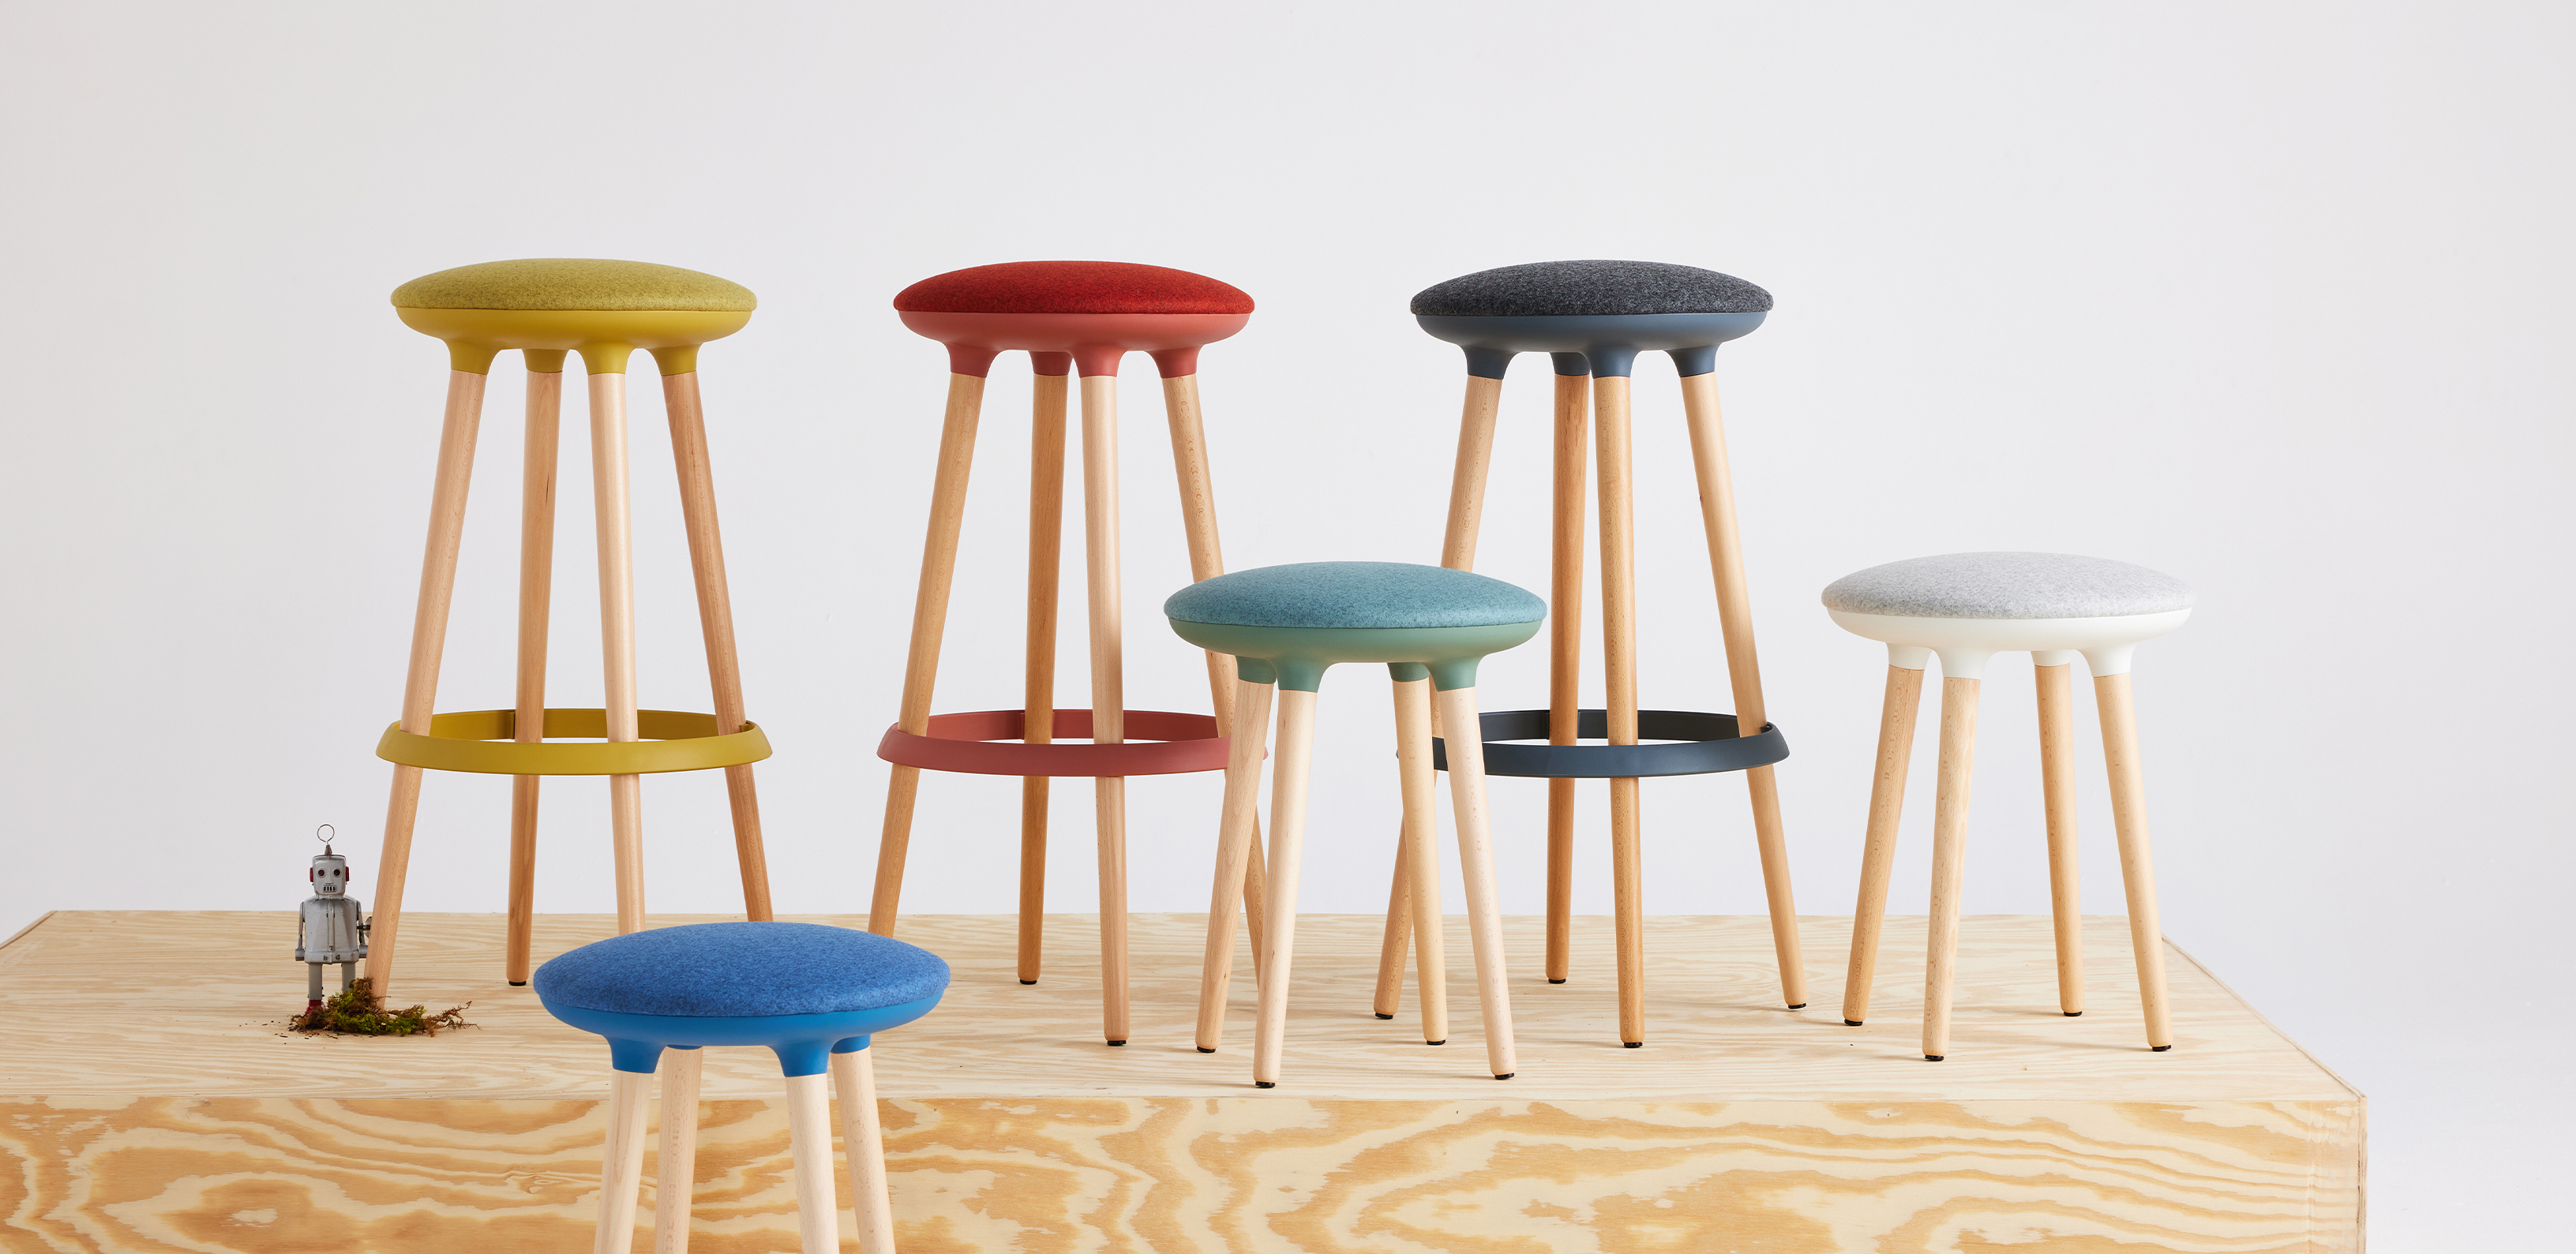 Joí stools in all available colors.